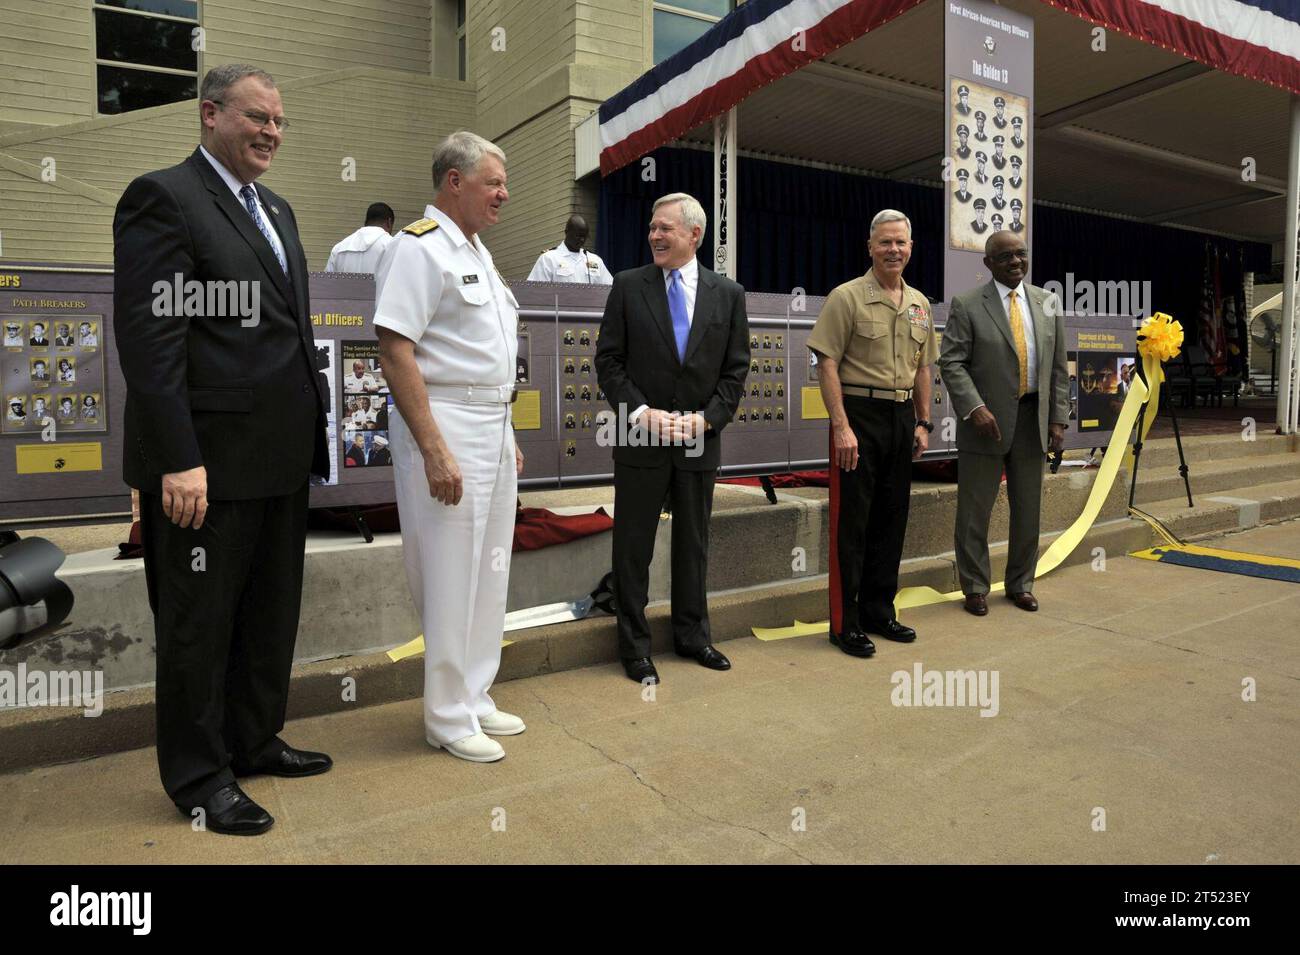 110713IL276-002 ARLINGTON, Va. (July 13, 2011) Undersecretary of the Navy Robert O. Work, left, Chief of Naval Operations (CNO) Adm. Gary Roughead, Secretary of the Navy (SECNAV) the Honorable Ray Mabus, Commandant of the Marine Corps Gen. James F. Amos and retired Assistant Secretary of the Navy B.J. Penn unveil an exhibit during the Department of the Navy tribute to African-American leadership at the Pentagon. Navy Stock Photo